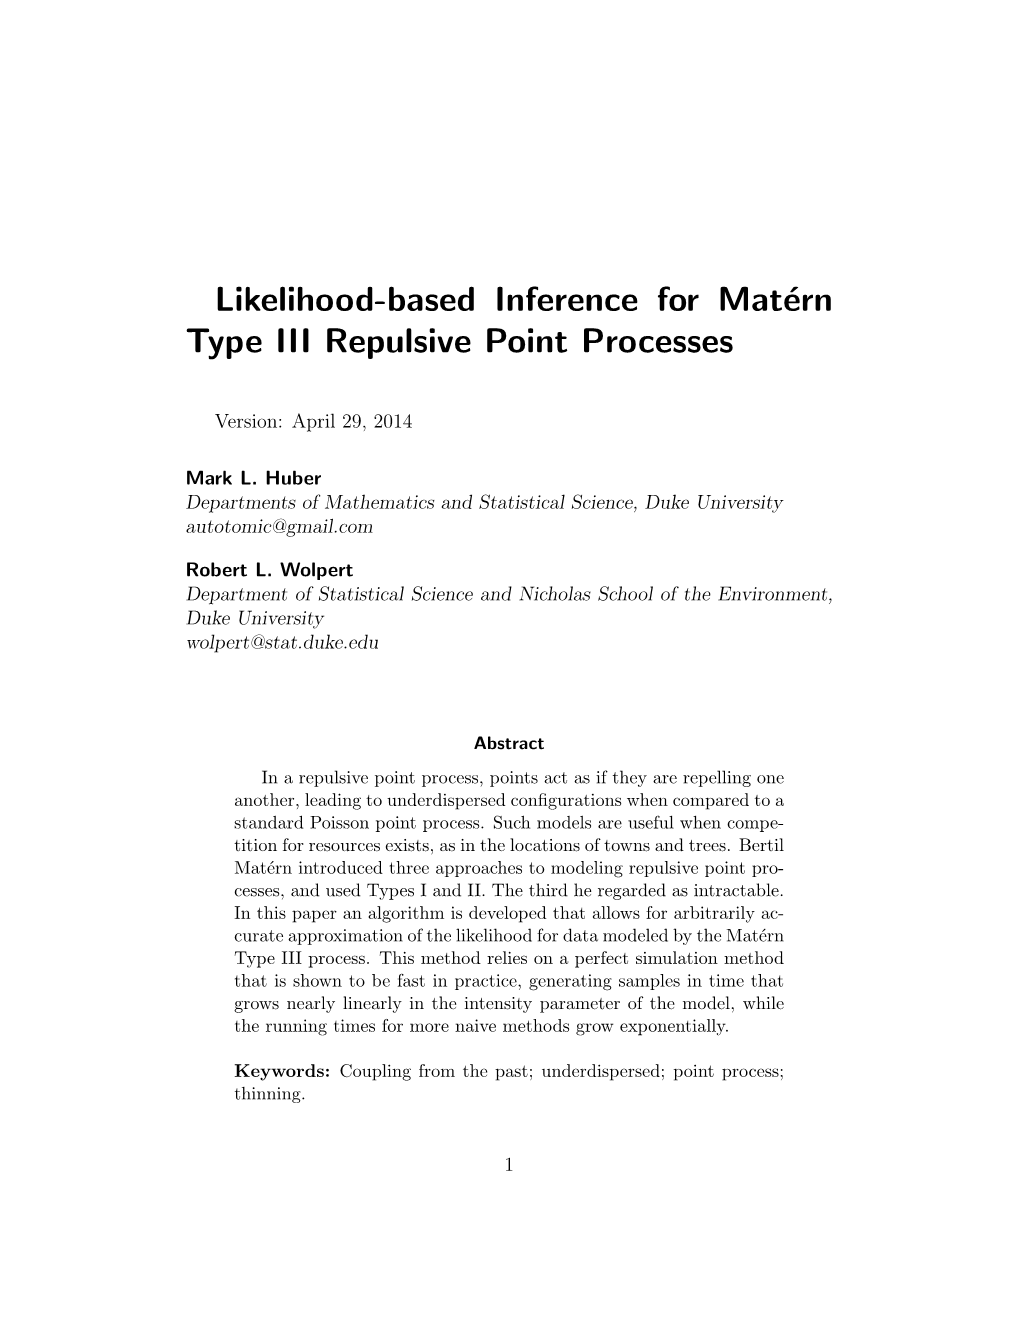 Likelihood-Based Inference for Matérn Type III Repulsive Point Processes